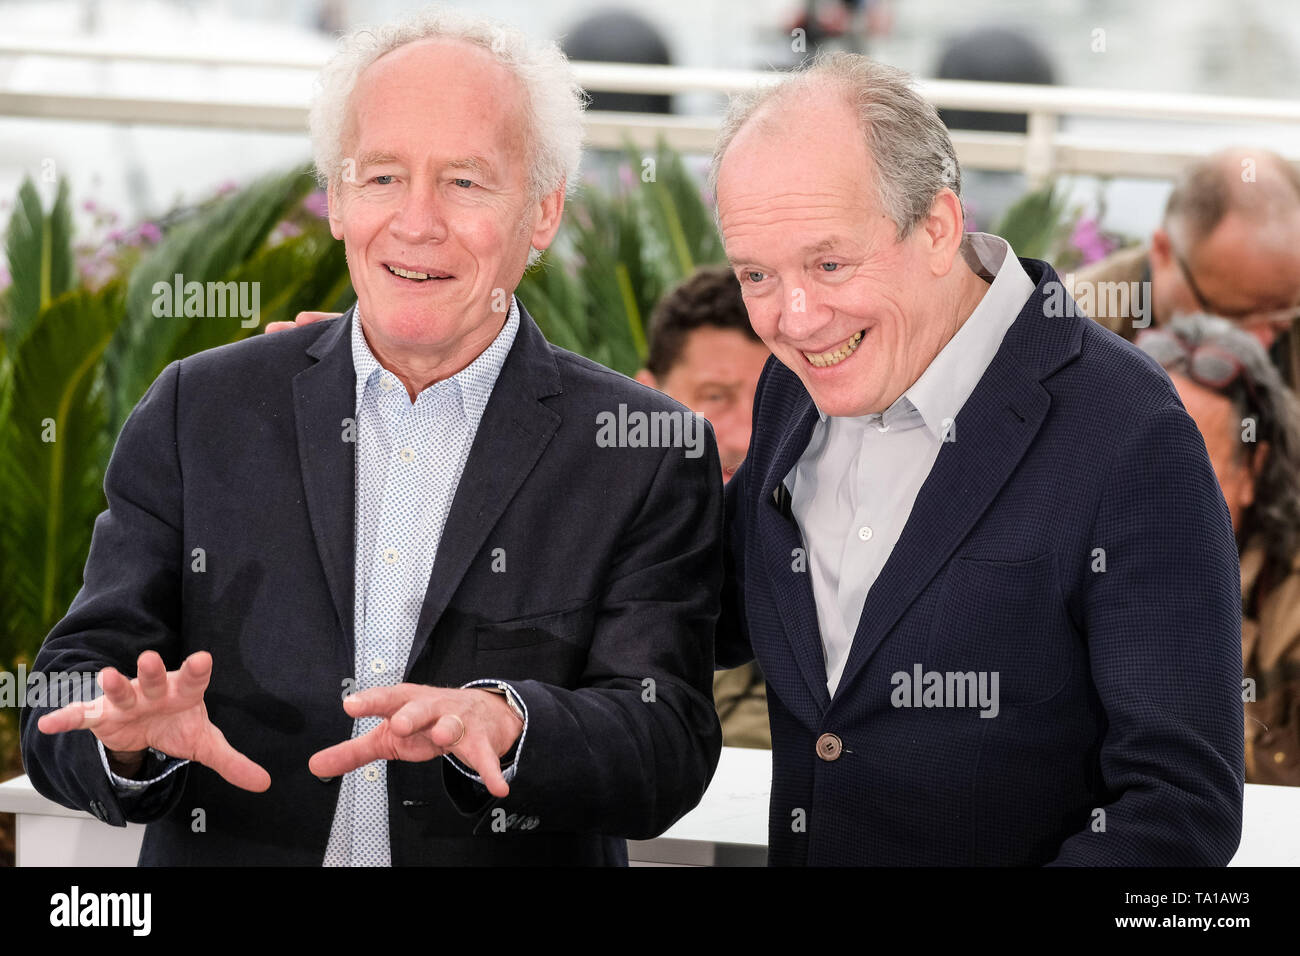 Cannes, France. 21st May 2019. Jean-Pierre Dardenne and Luc Dardenne poses at a photocall for Young Ahmed on Tuesday 21 May 2019 at the 72nd Festival de Cannes, Palais des Festivals, Cannes. Pictured: Jean-Pierre Dardenne, Luc Dardenne. Picture by Credit: Julie Edwards/Alamy Live News Stock Photo